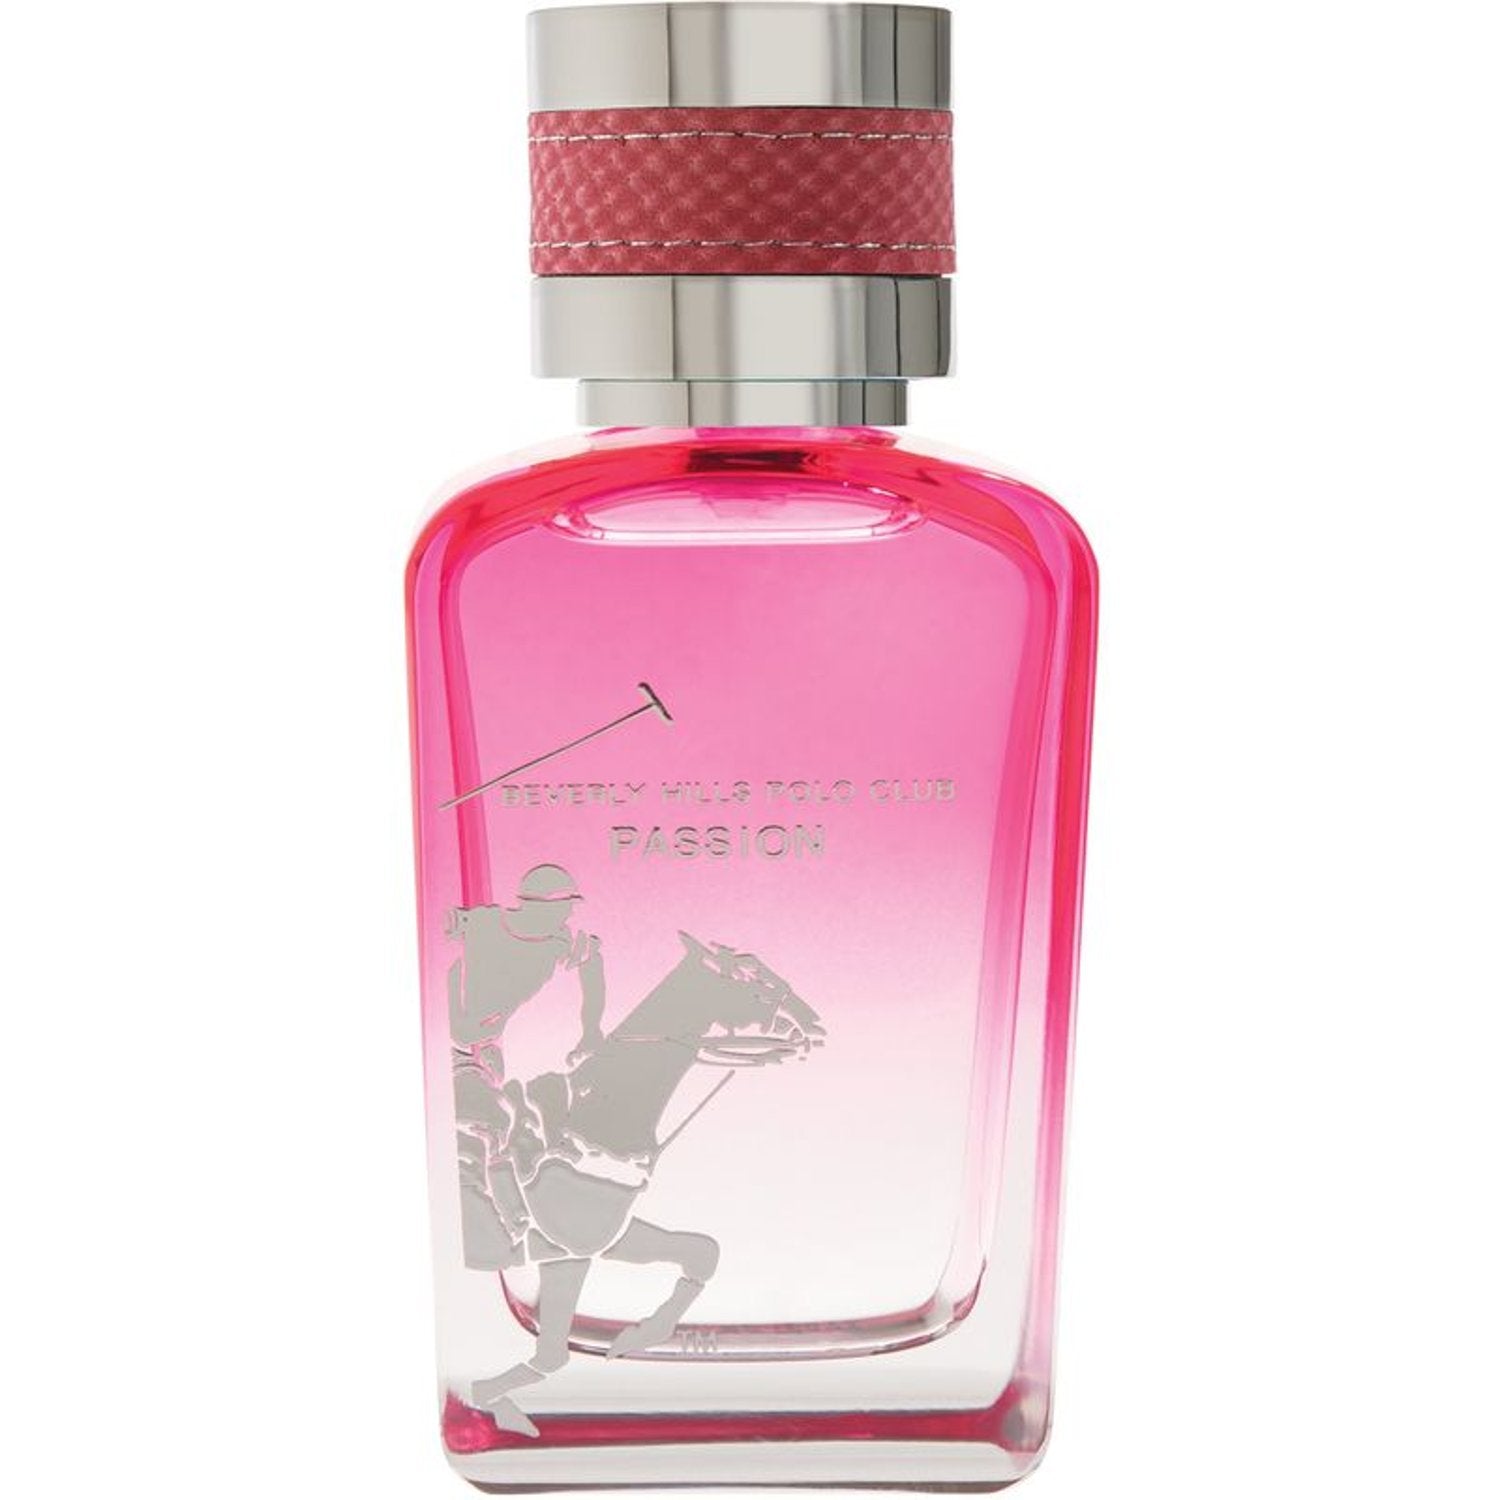 Beverly Hills Polo Club Passion Perfume Online in Bahrain - Halabh